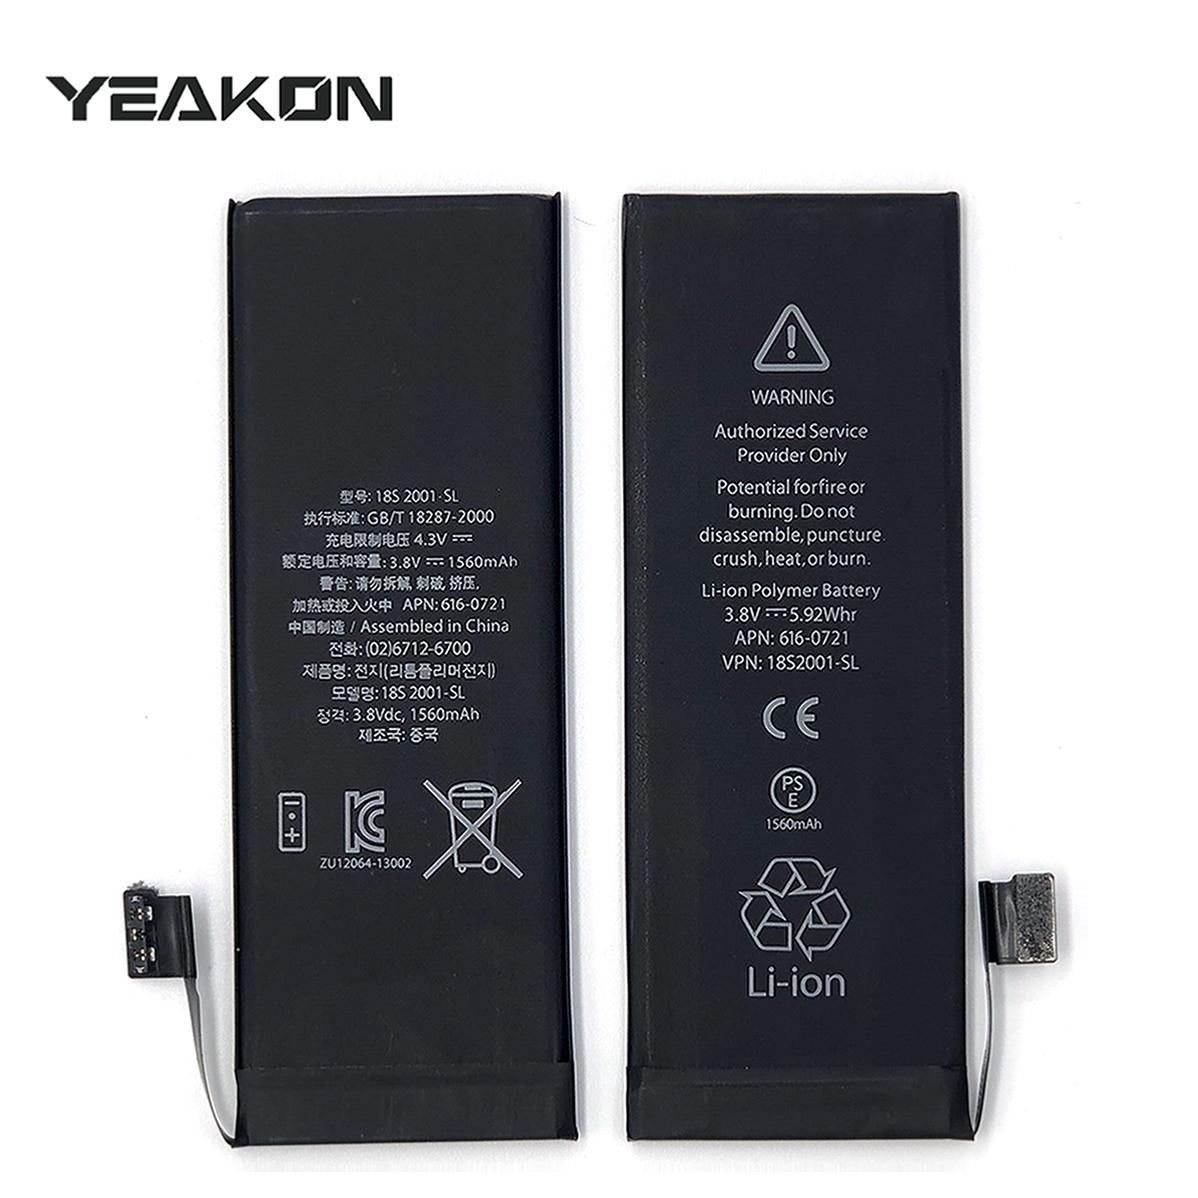 Apple iPhone 5/5s Battery Wholesale Suppliers